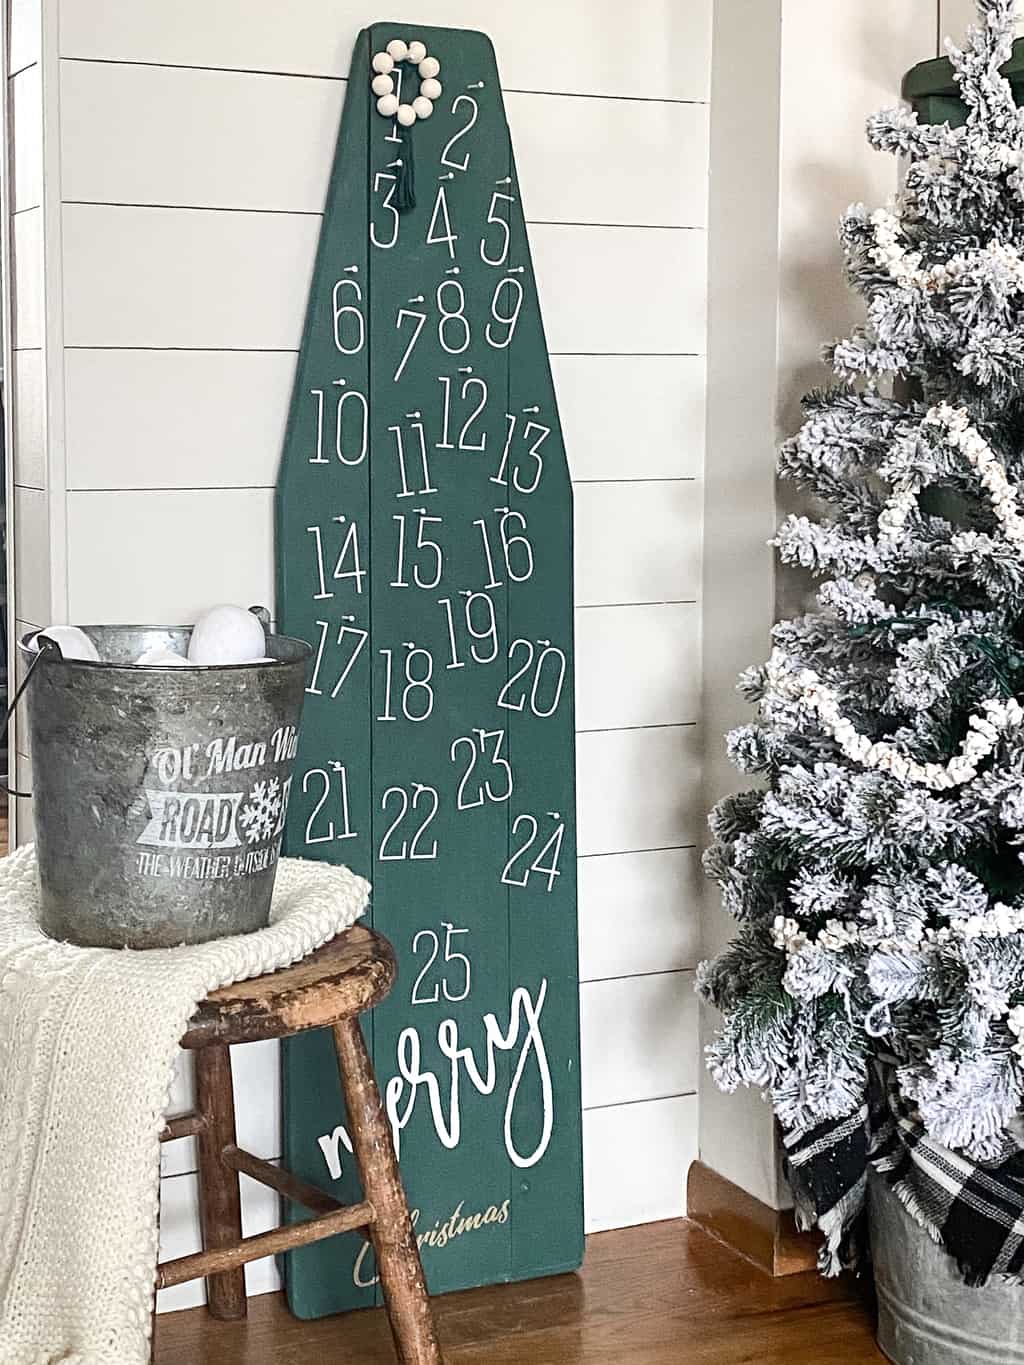 DIY Christmas Countdown - repurpose an old, wood ironing board into something festive for the holiday season that can be used for years and years.